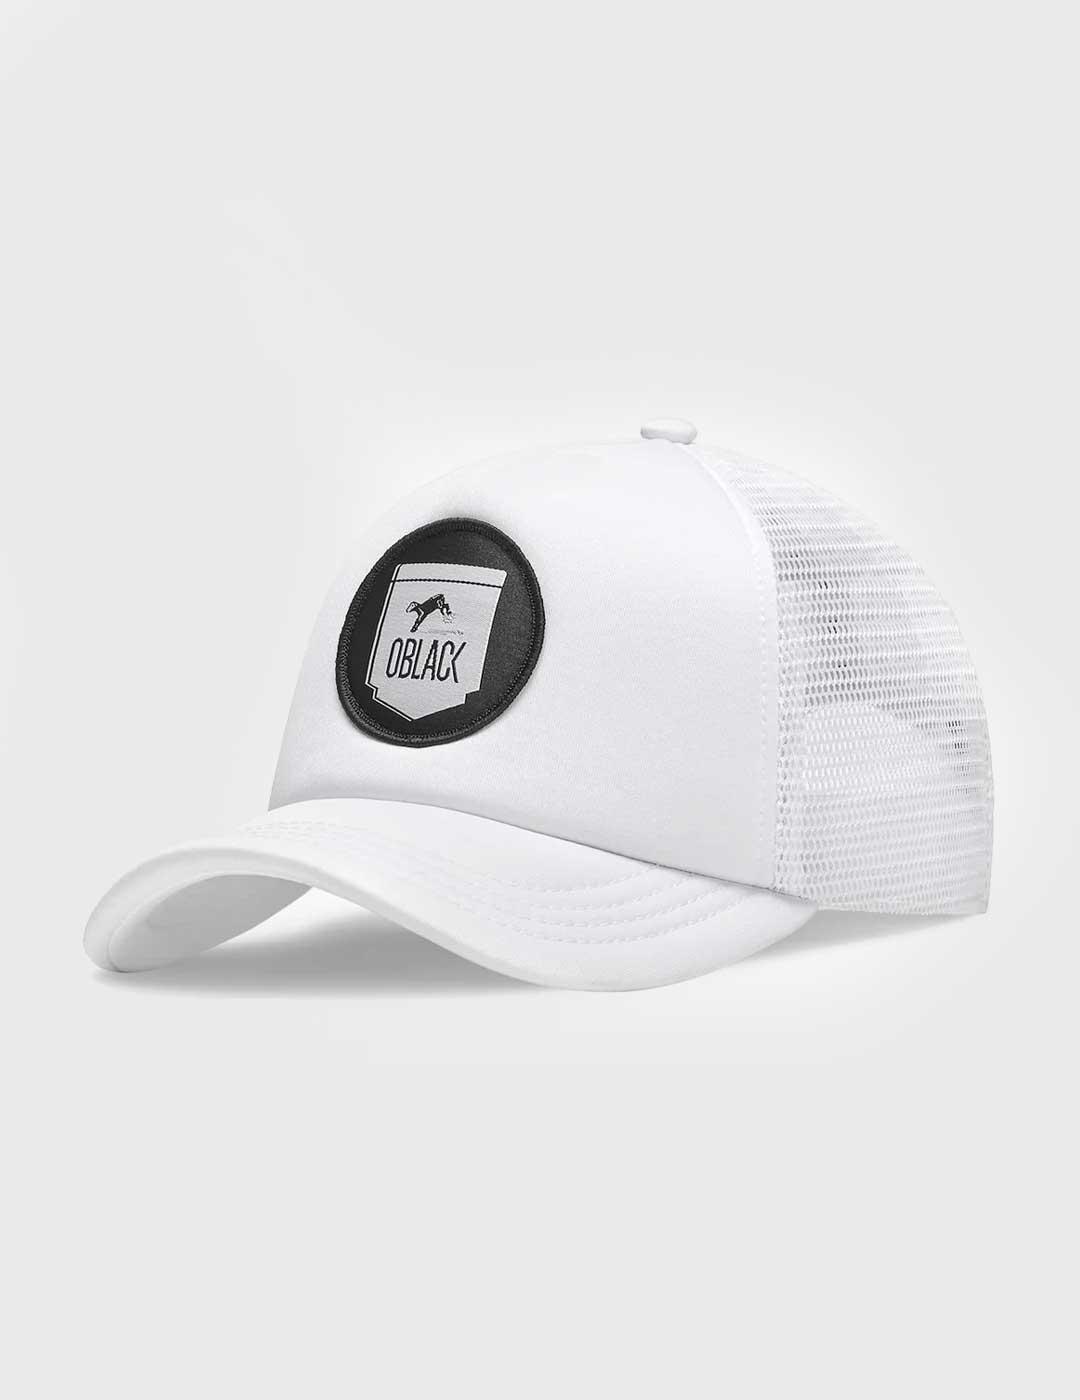 Gorra Oblack Classic Total White blanca para hombre y mujer